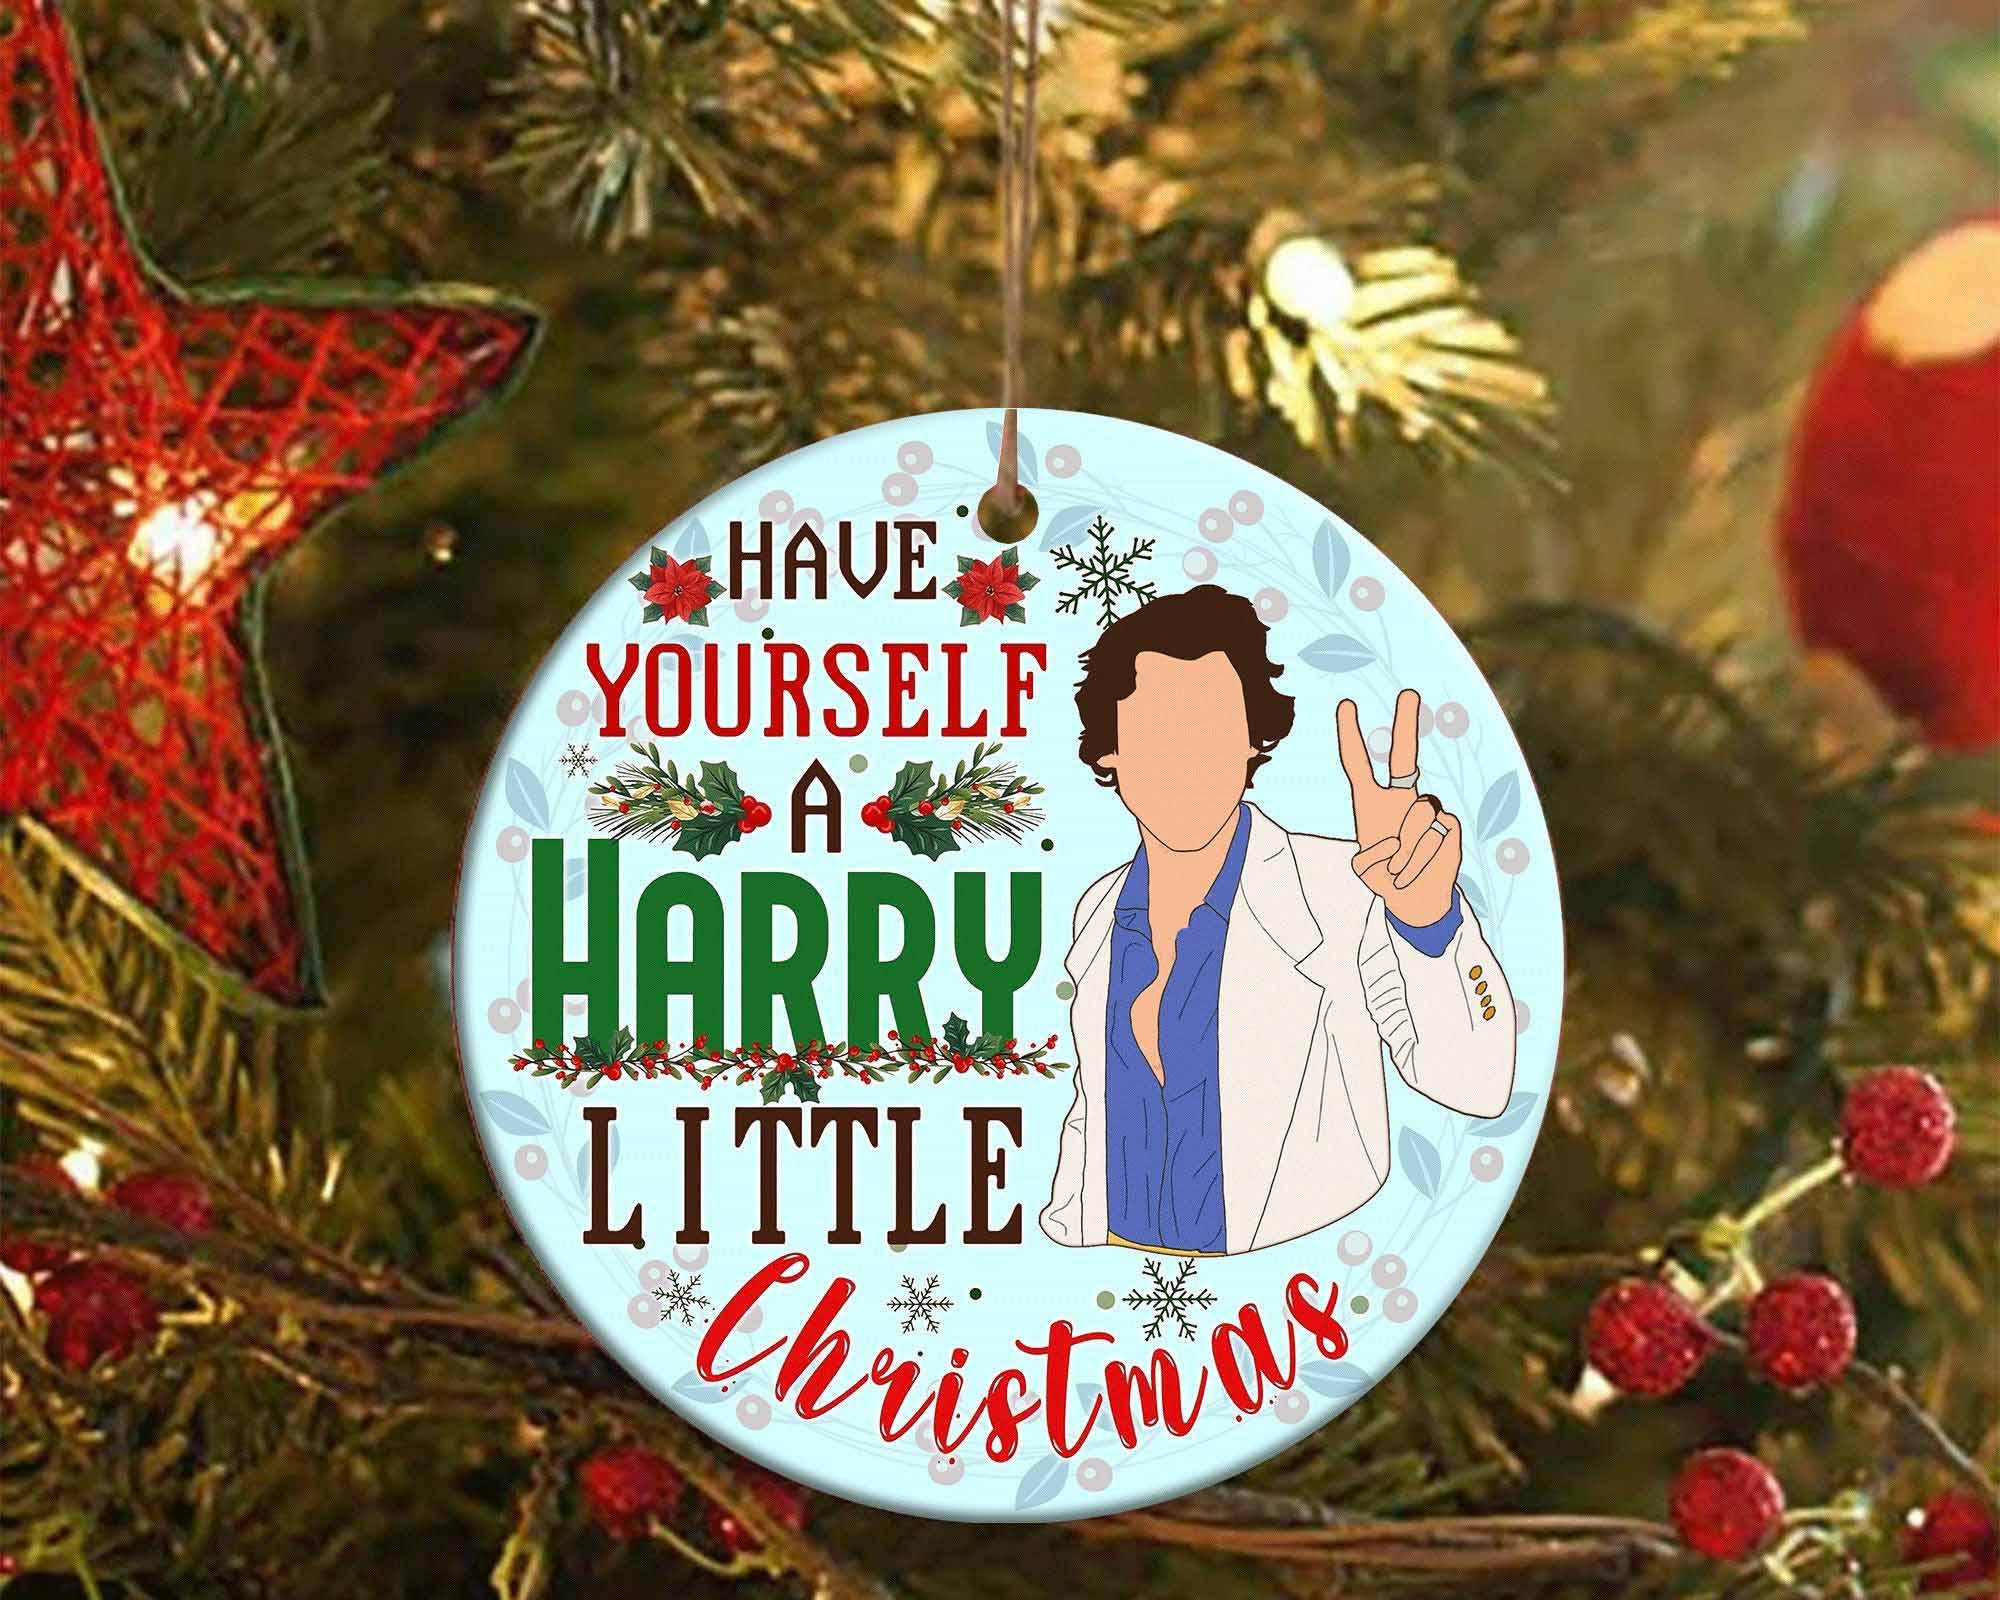 Harry Styles Gifts Love On Tour Christmas Ornament Xmas Tree Decor